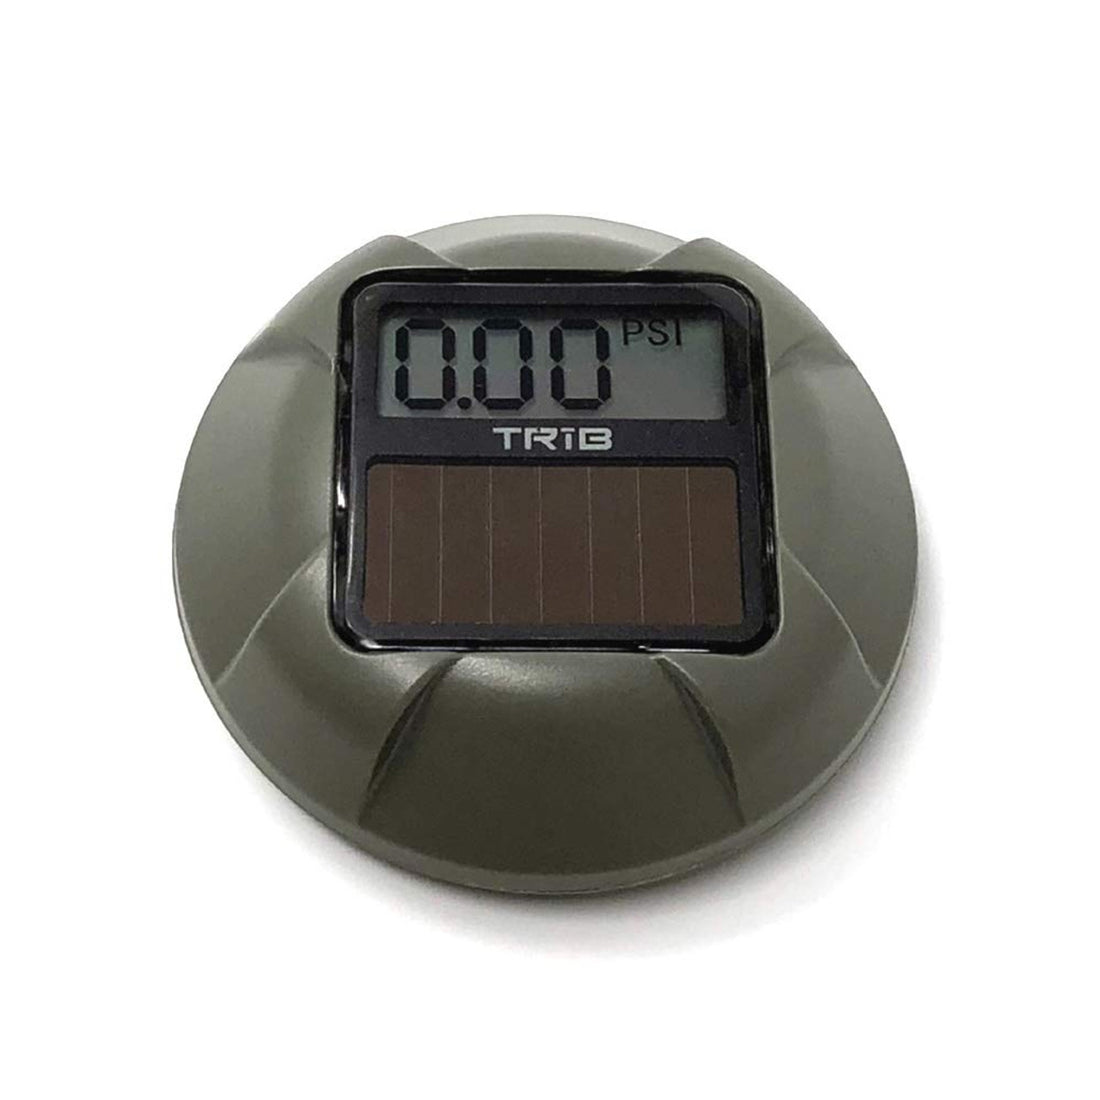 New product: Trib Outdoor Tech Solar-Powered airCap Pressure Gauge